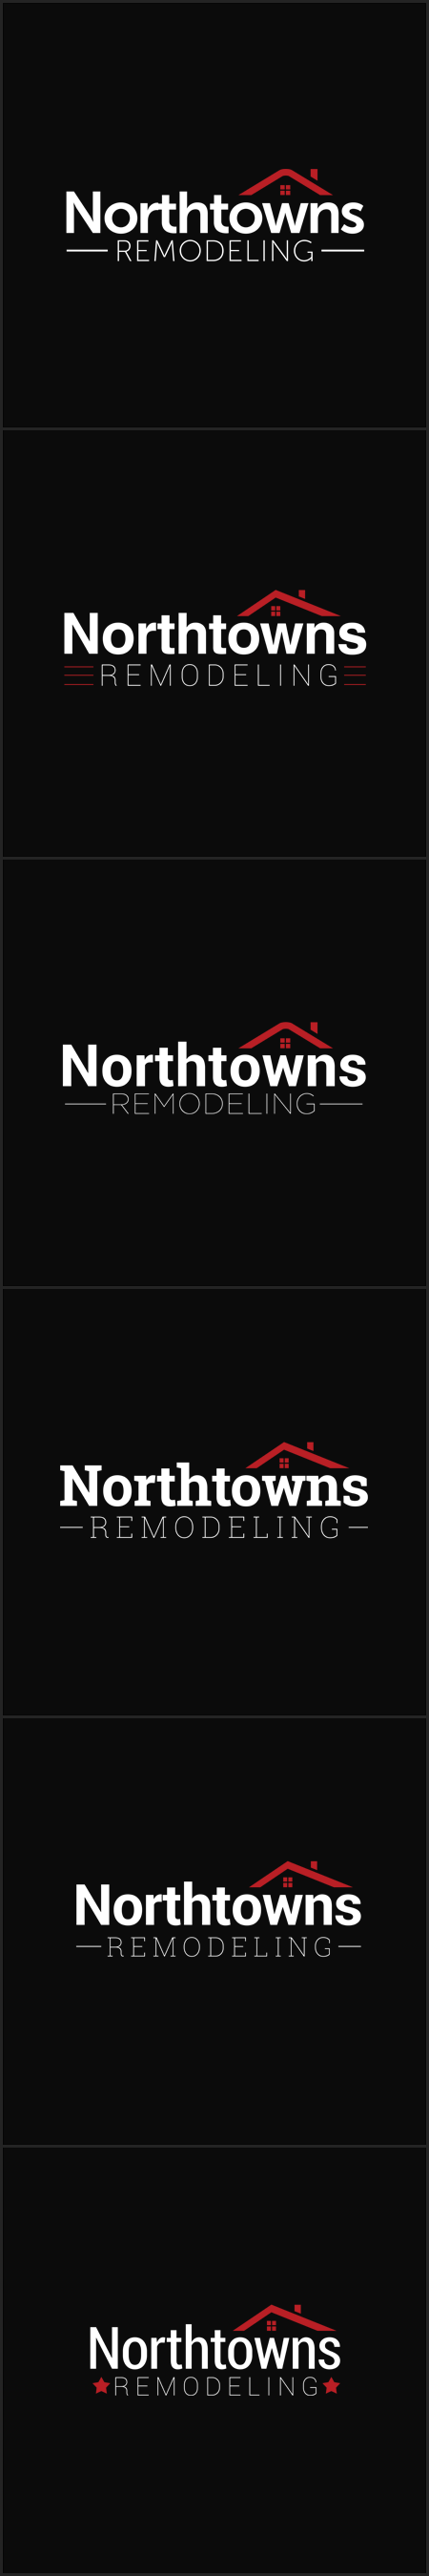 Northtowns Remodeling Corp. Phase 2